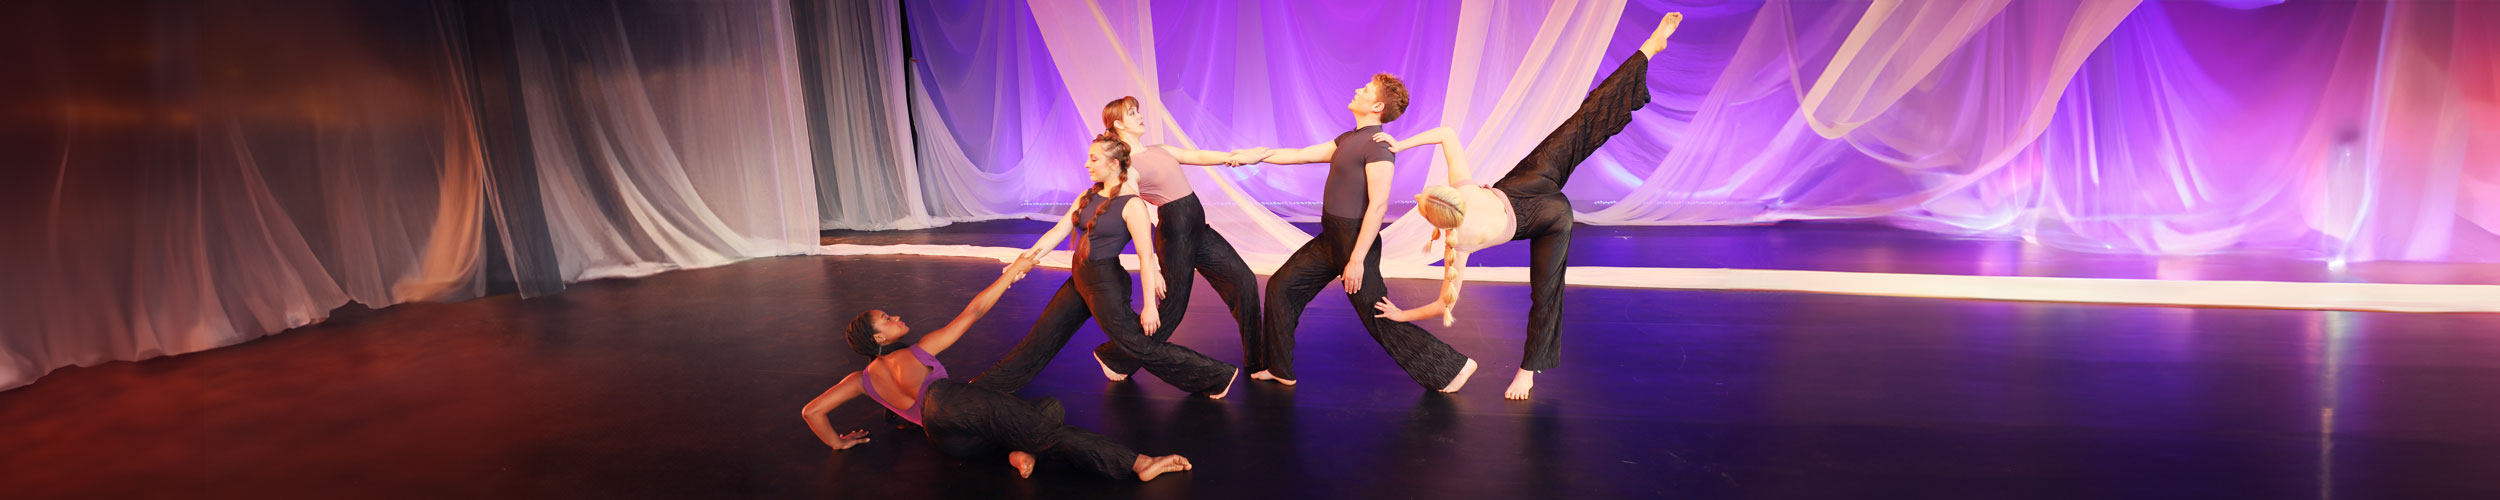 Students on Stage, Evening of Dance Performance